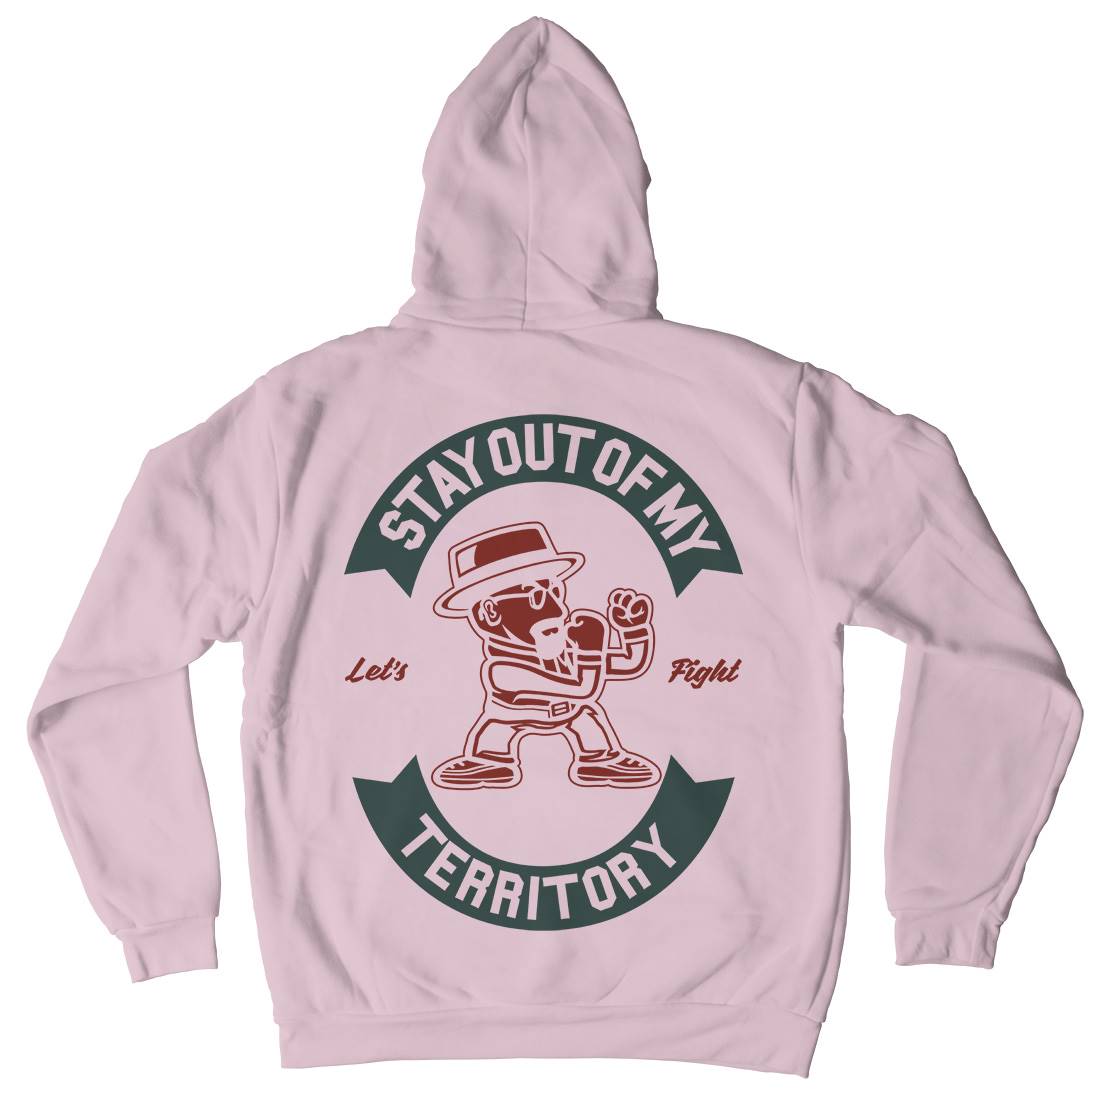 Stay Out Kids Crew Neck Hoodie Retro A284